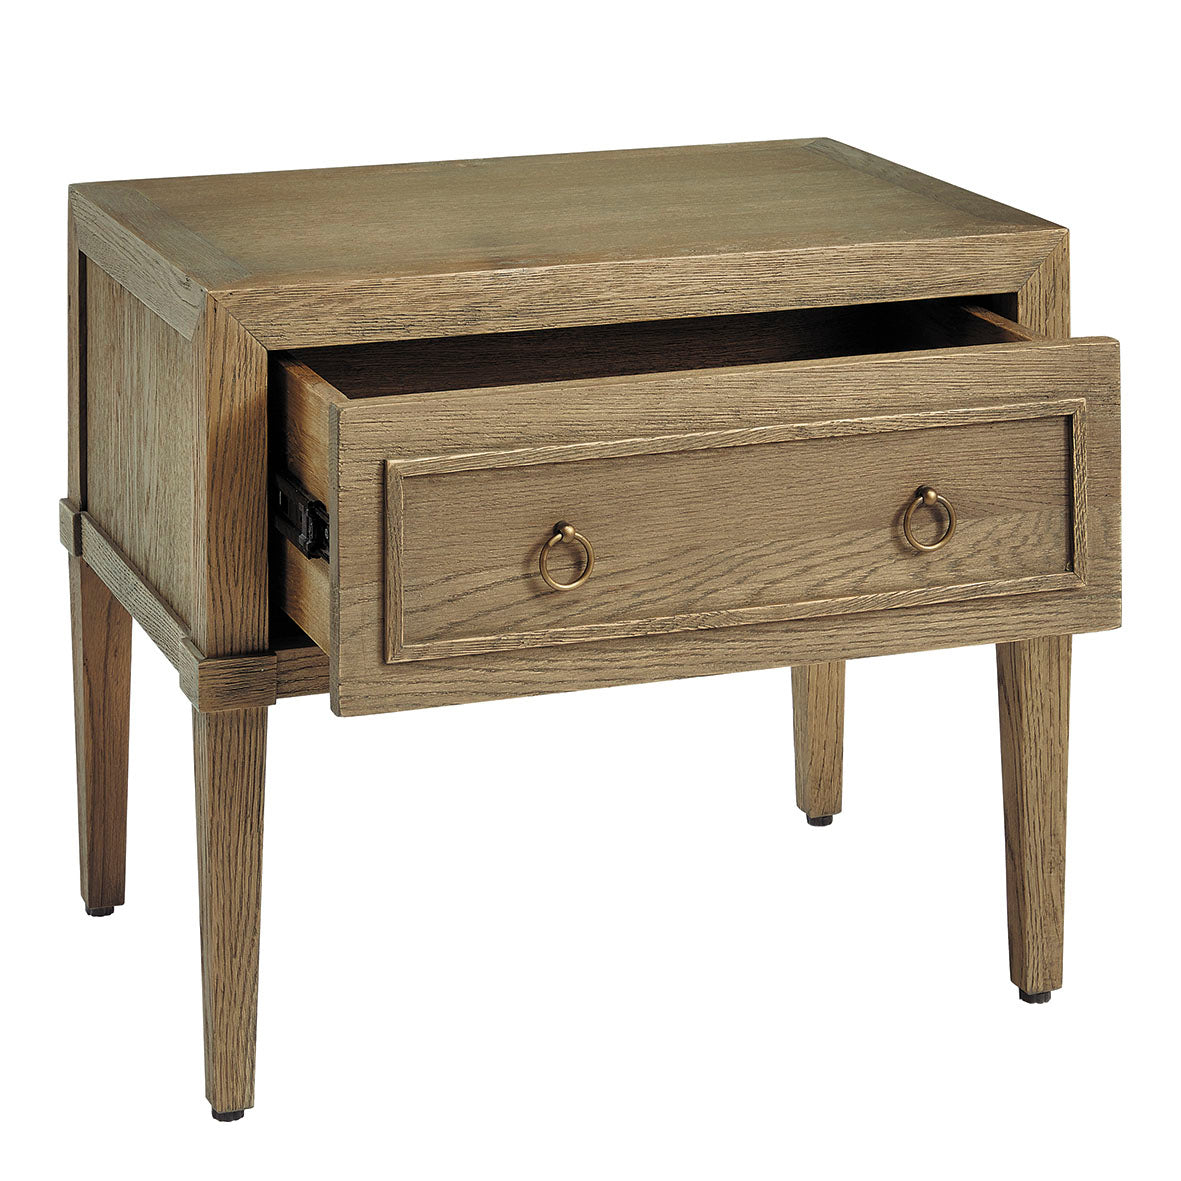 Ariane bedside table